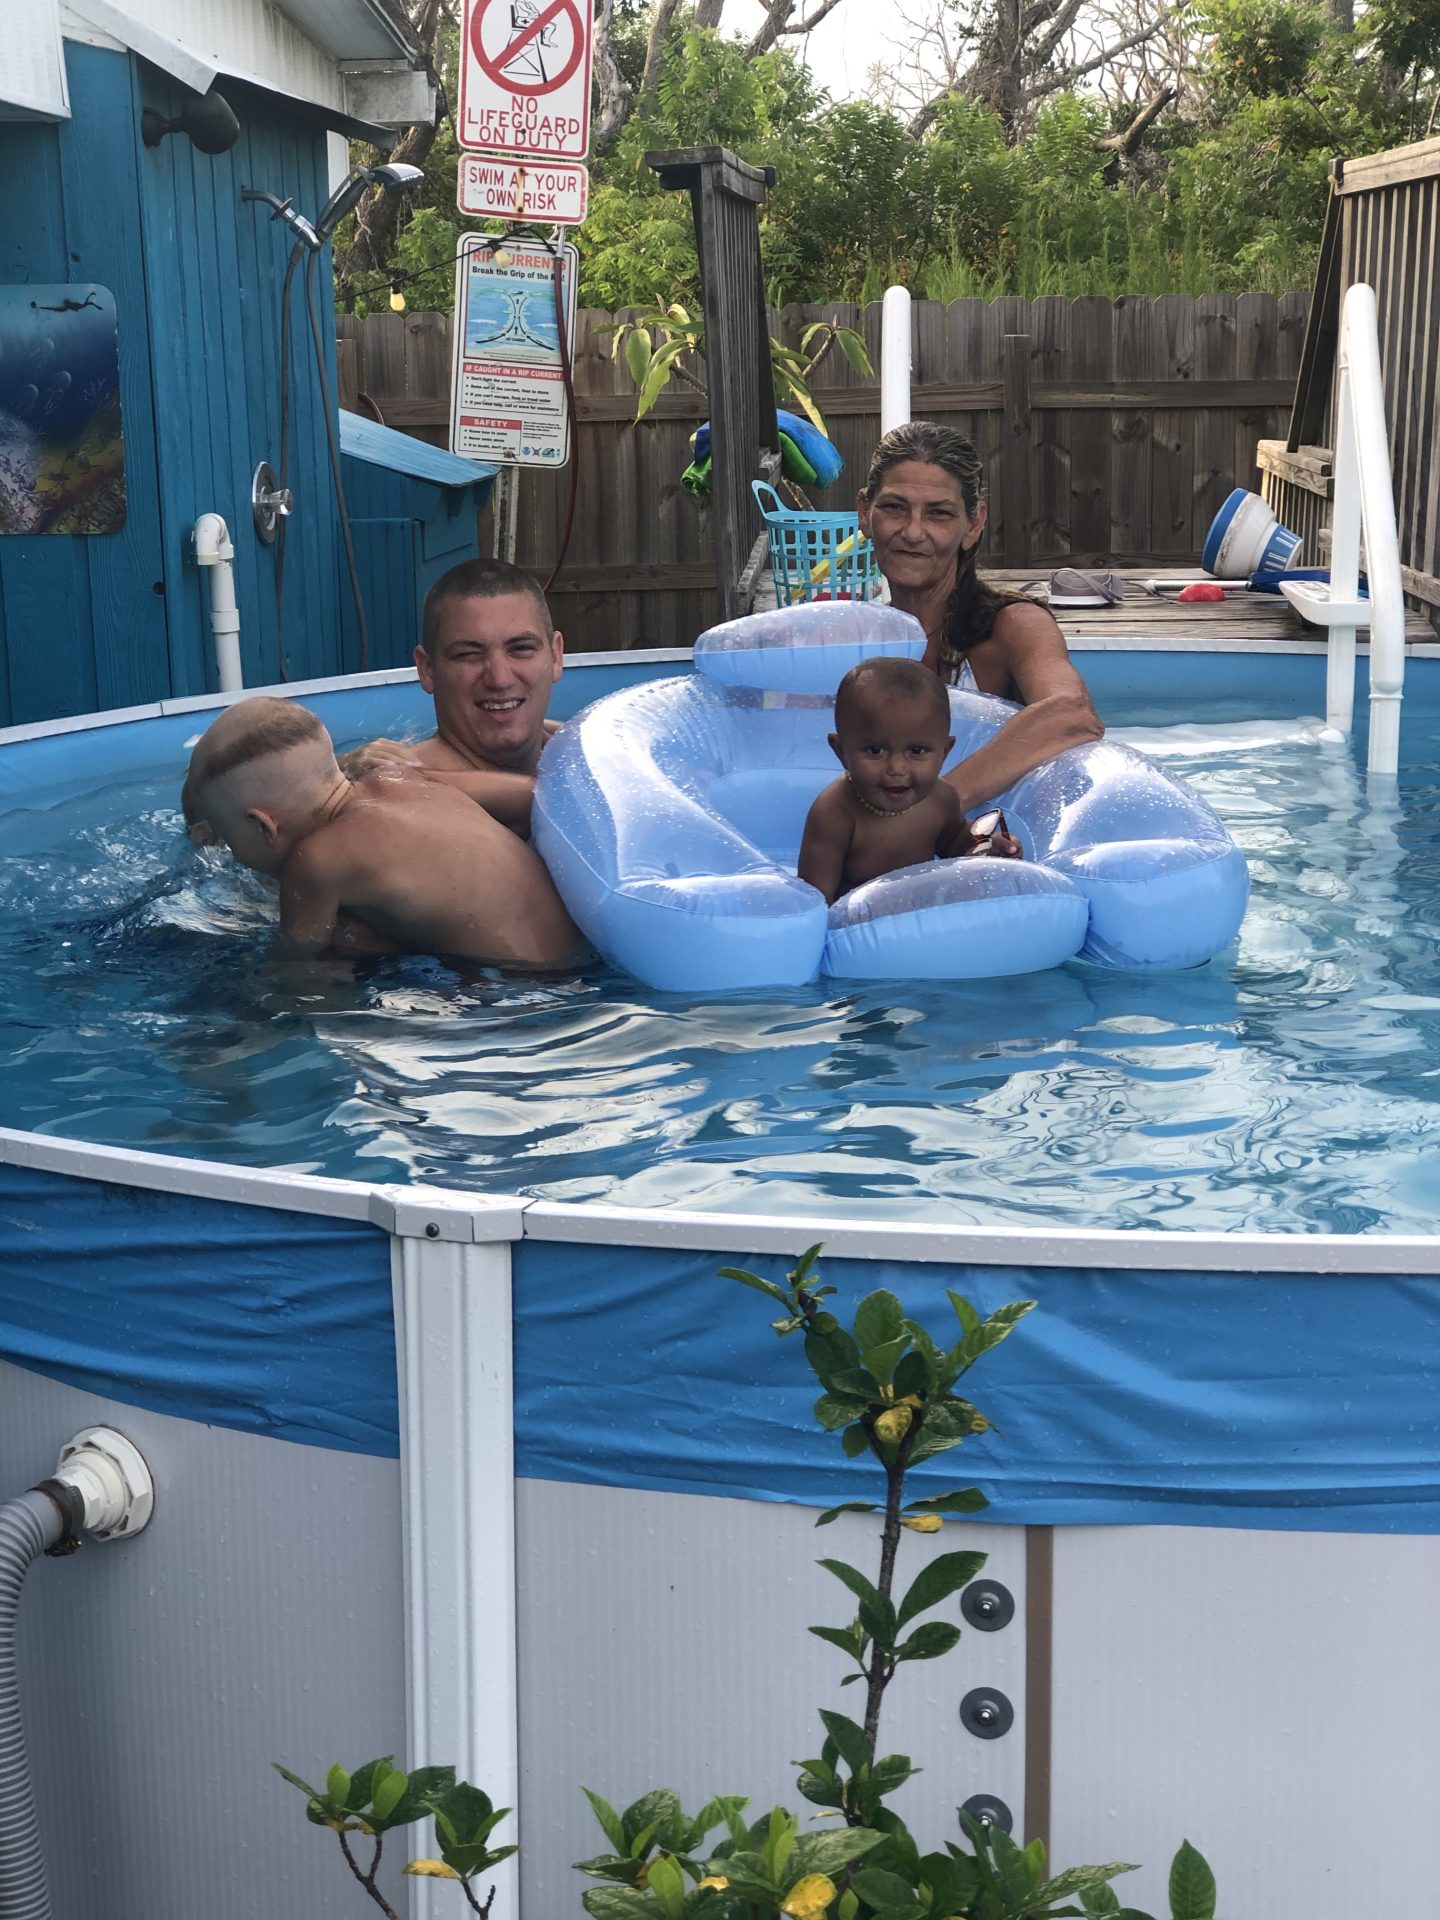 Good ole family pool time! <br />
June 25, 2020<br />
Landon, Timothy, Presley, Grammy and Phoenix ❤️